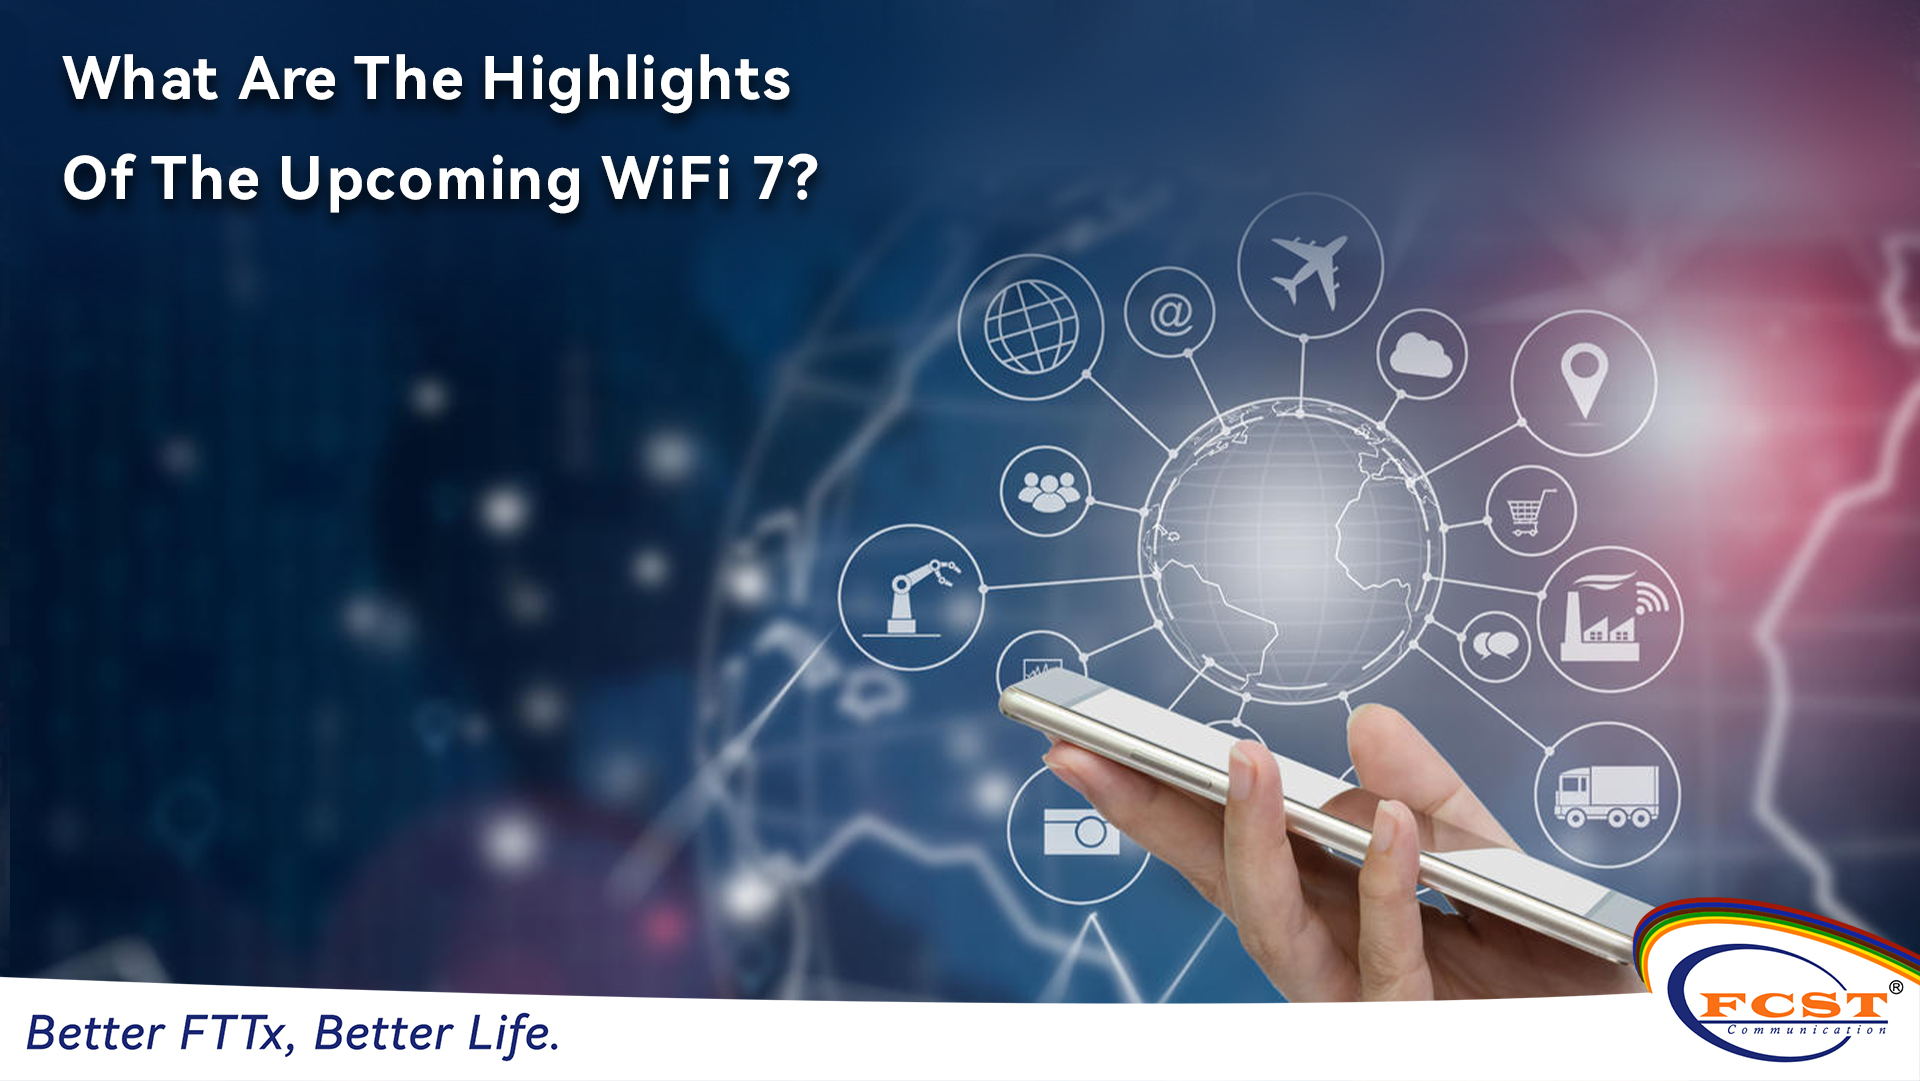 What Are The Highlights Of The Upcoming WiFi 7?